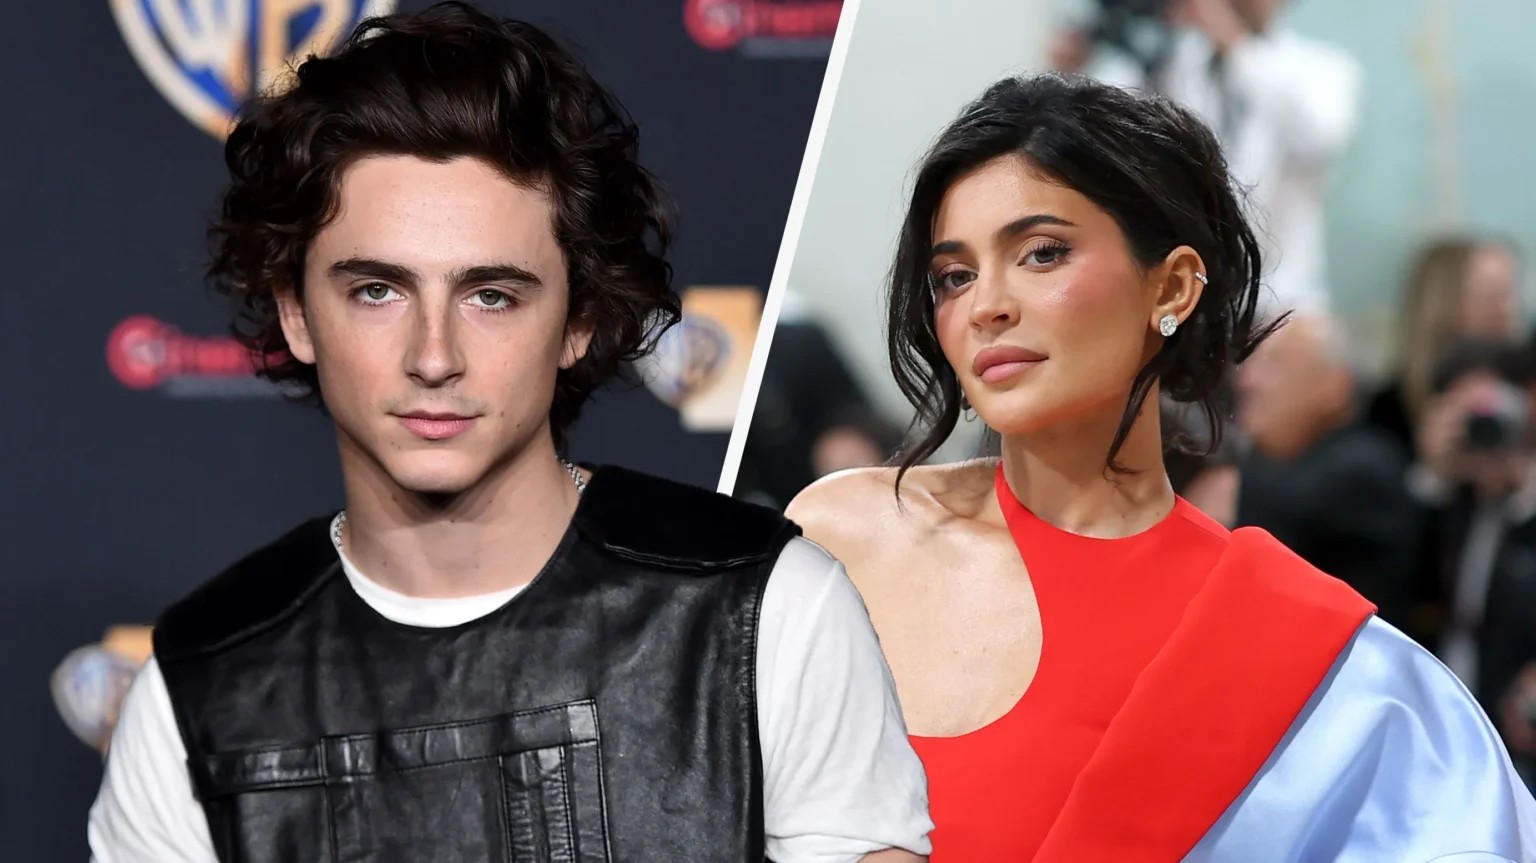 kylie-jenner-timothee-chalamet-spotted-together-in-new-york-following-split-rumours